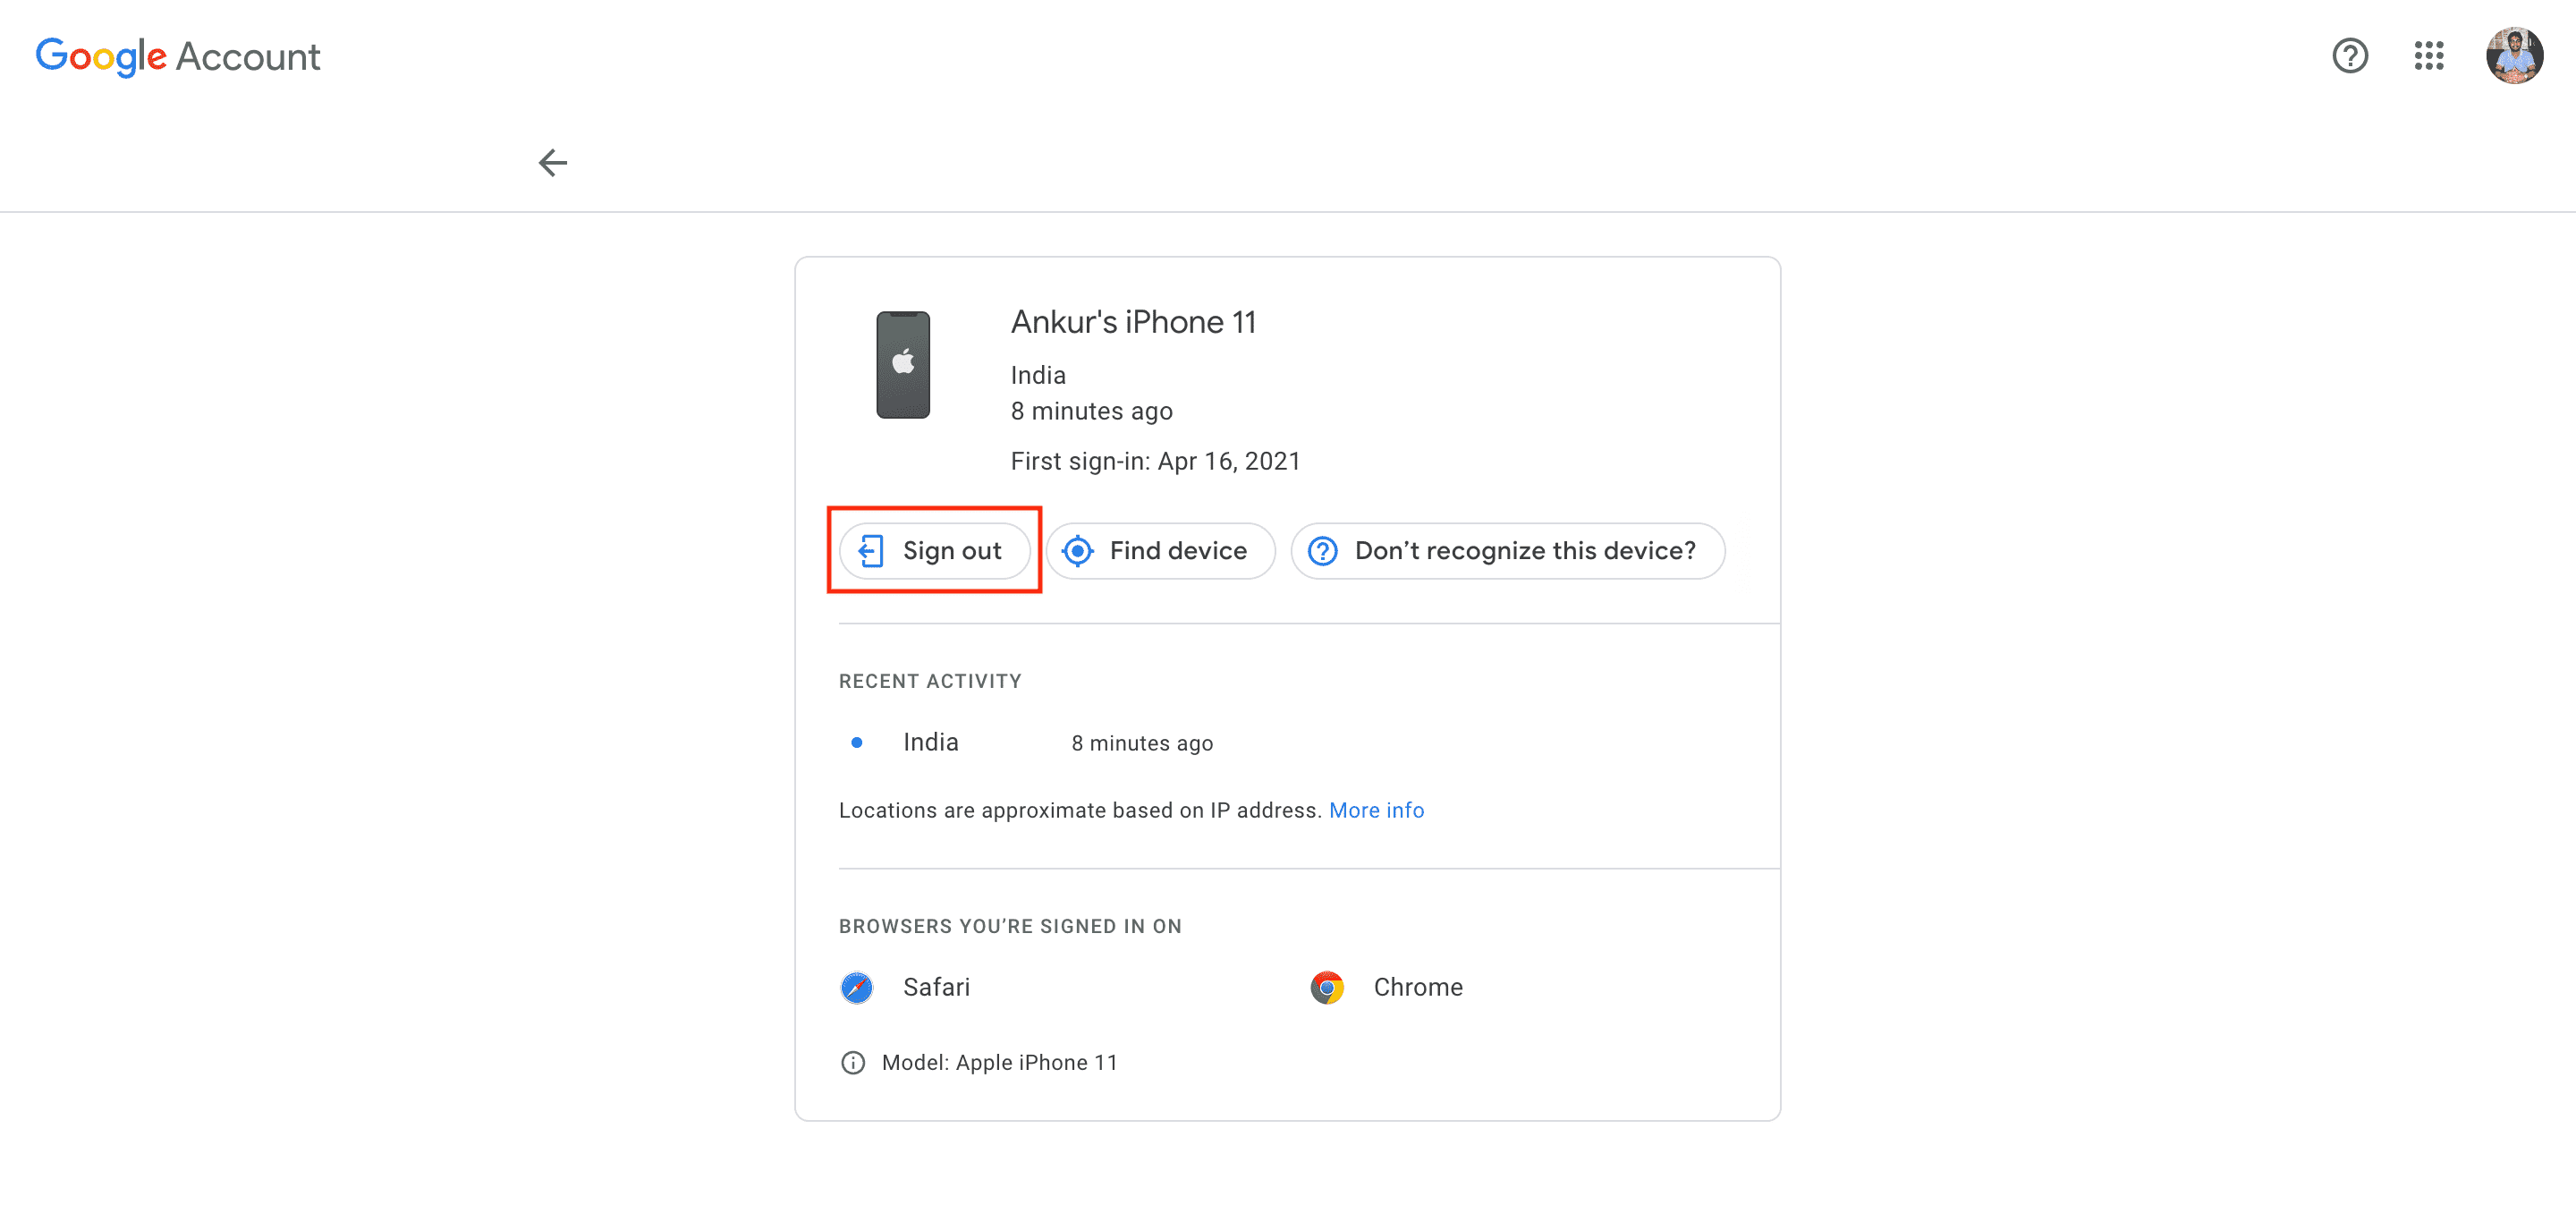 Sign out of your Google account remotely